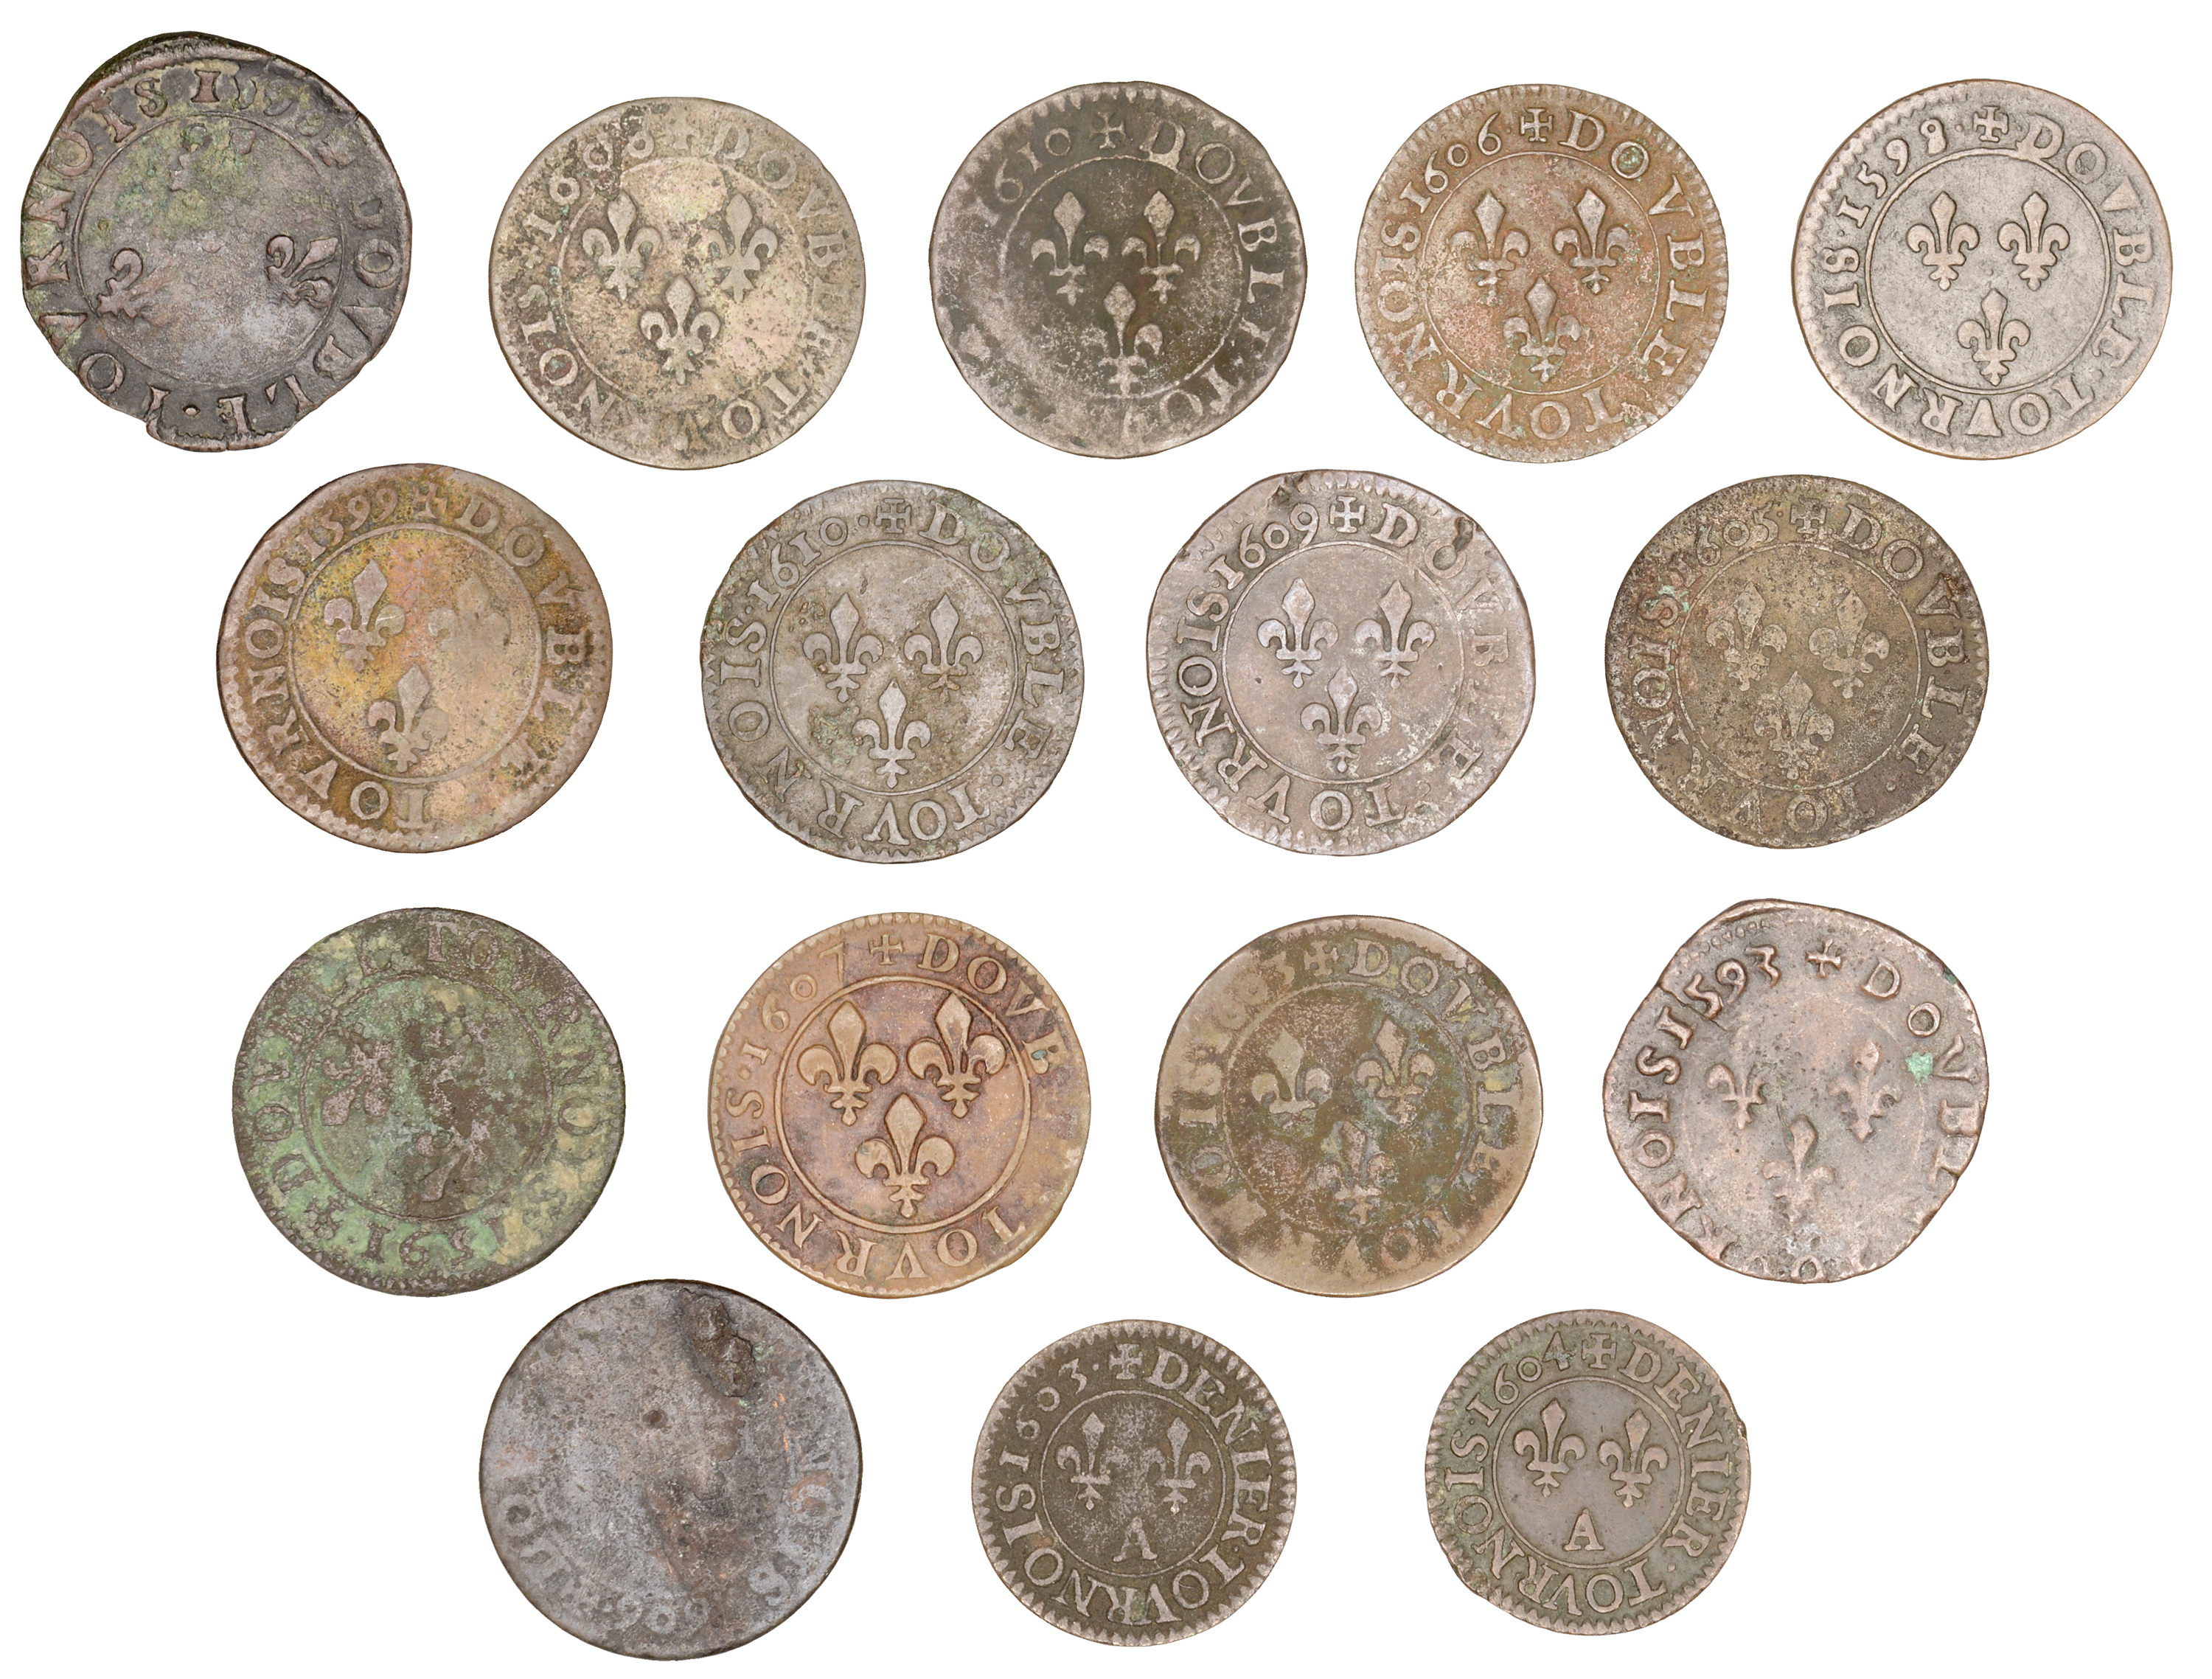 France, Henry IV (1590-1610), Doubles Tournois (14), 1591ch, 1593b, 1598a, 1599a, 1603a, 160... - Image 2 of 2